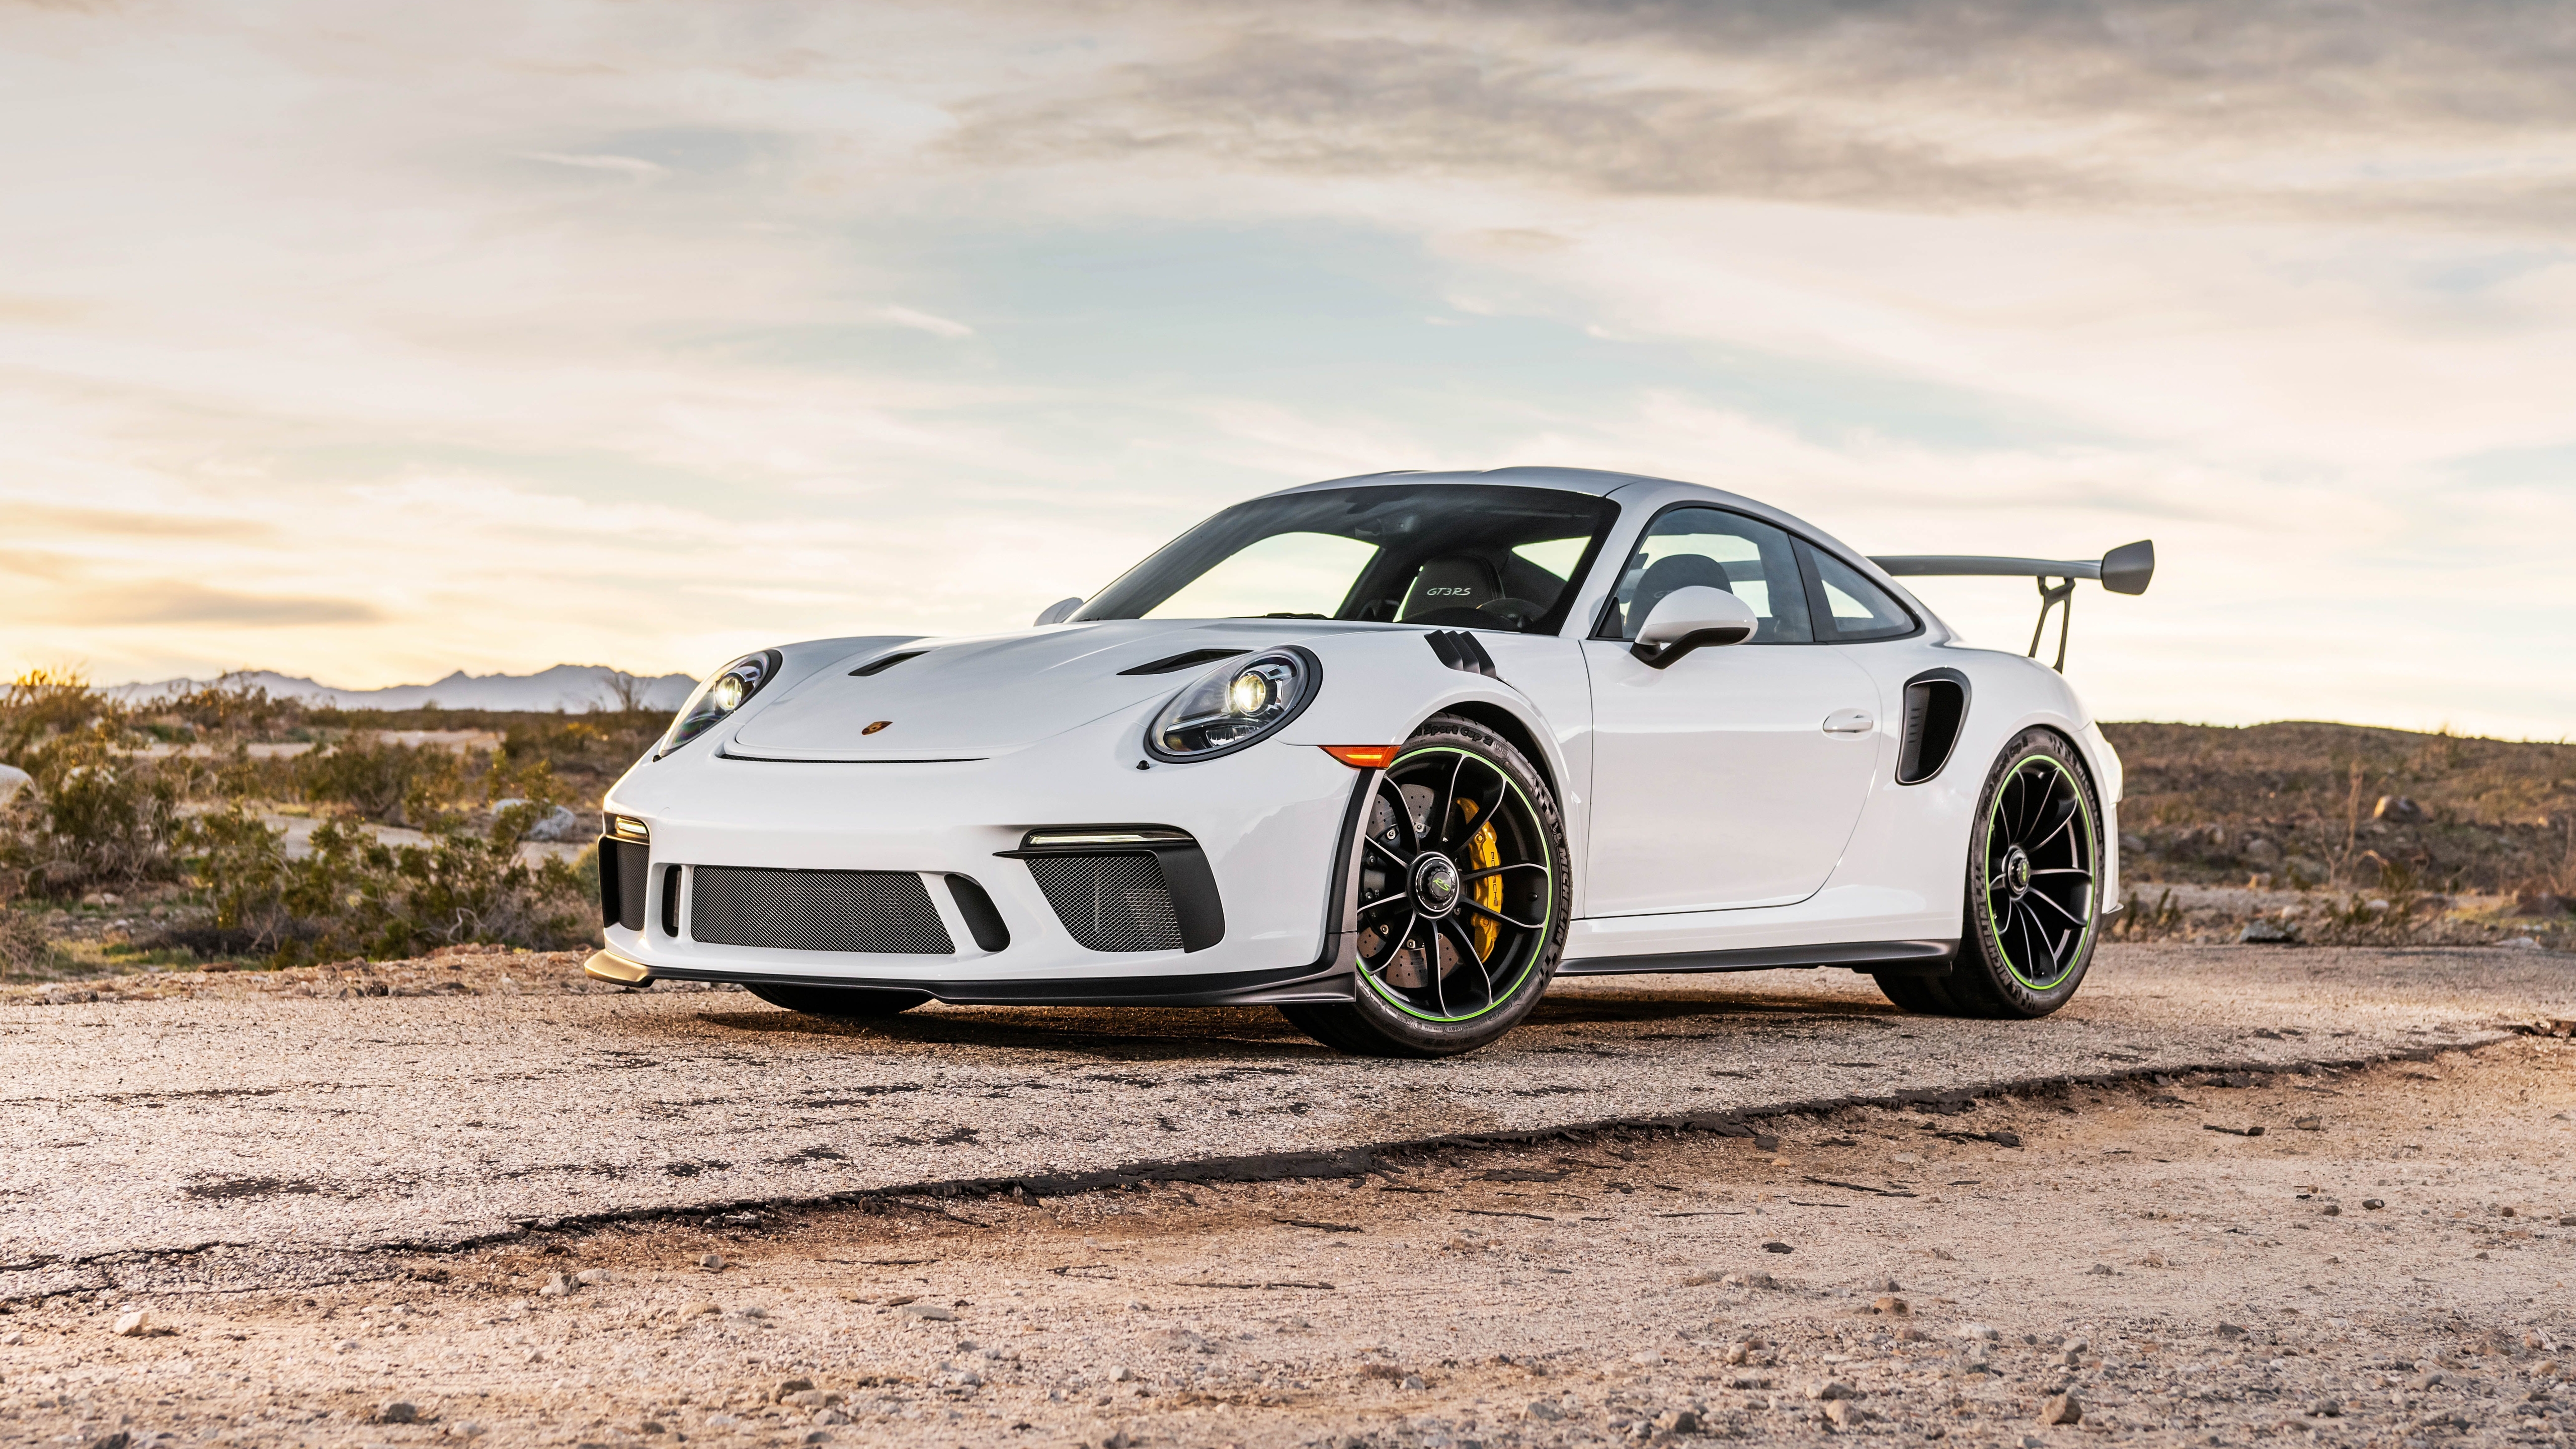 5120x2880 Porsche Gt3 Rs 2019 5k Wallpaper Hd Cars 4k Wallpapers Images Photos And Background Wallpapers Den